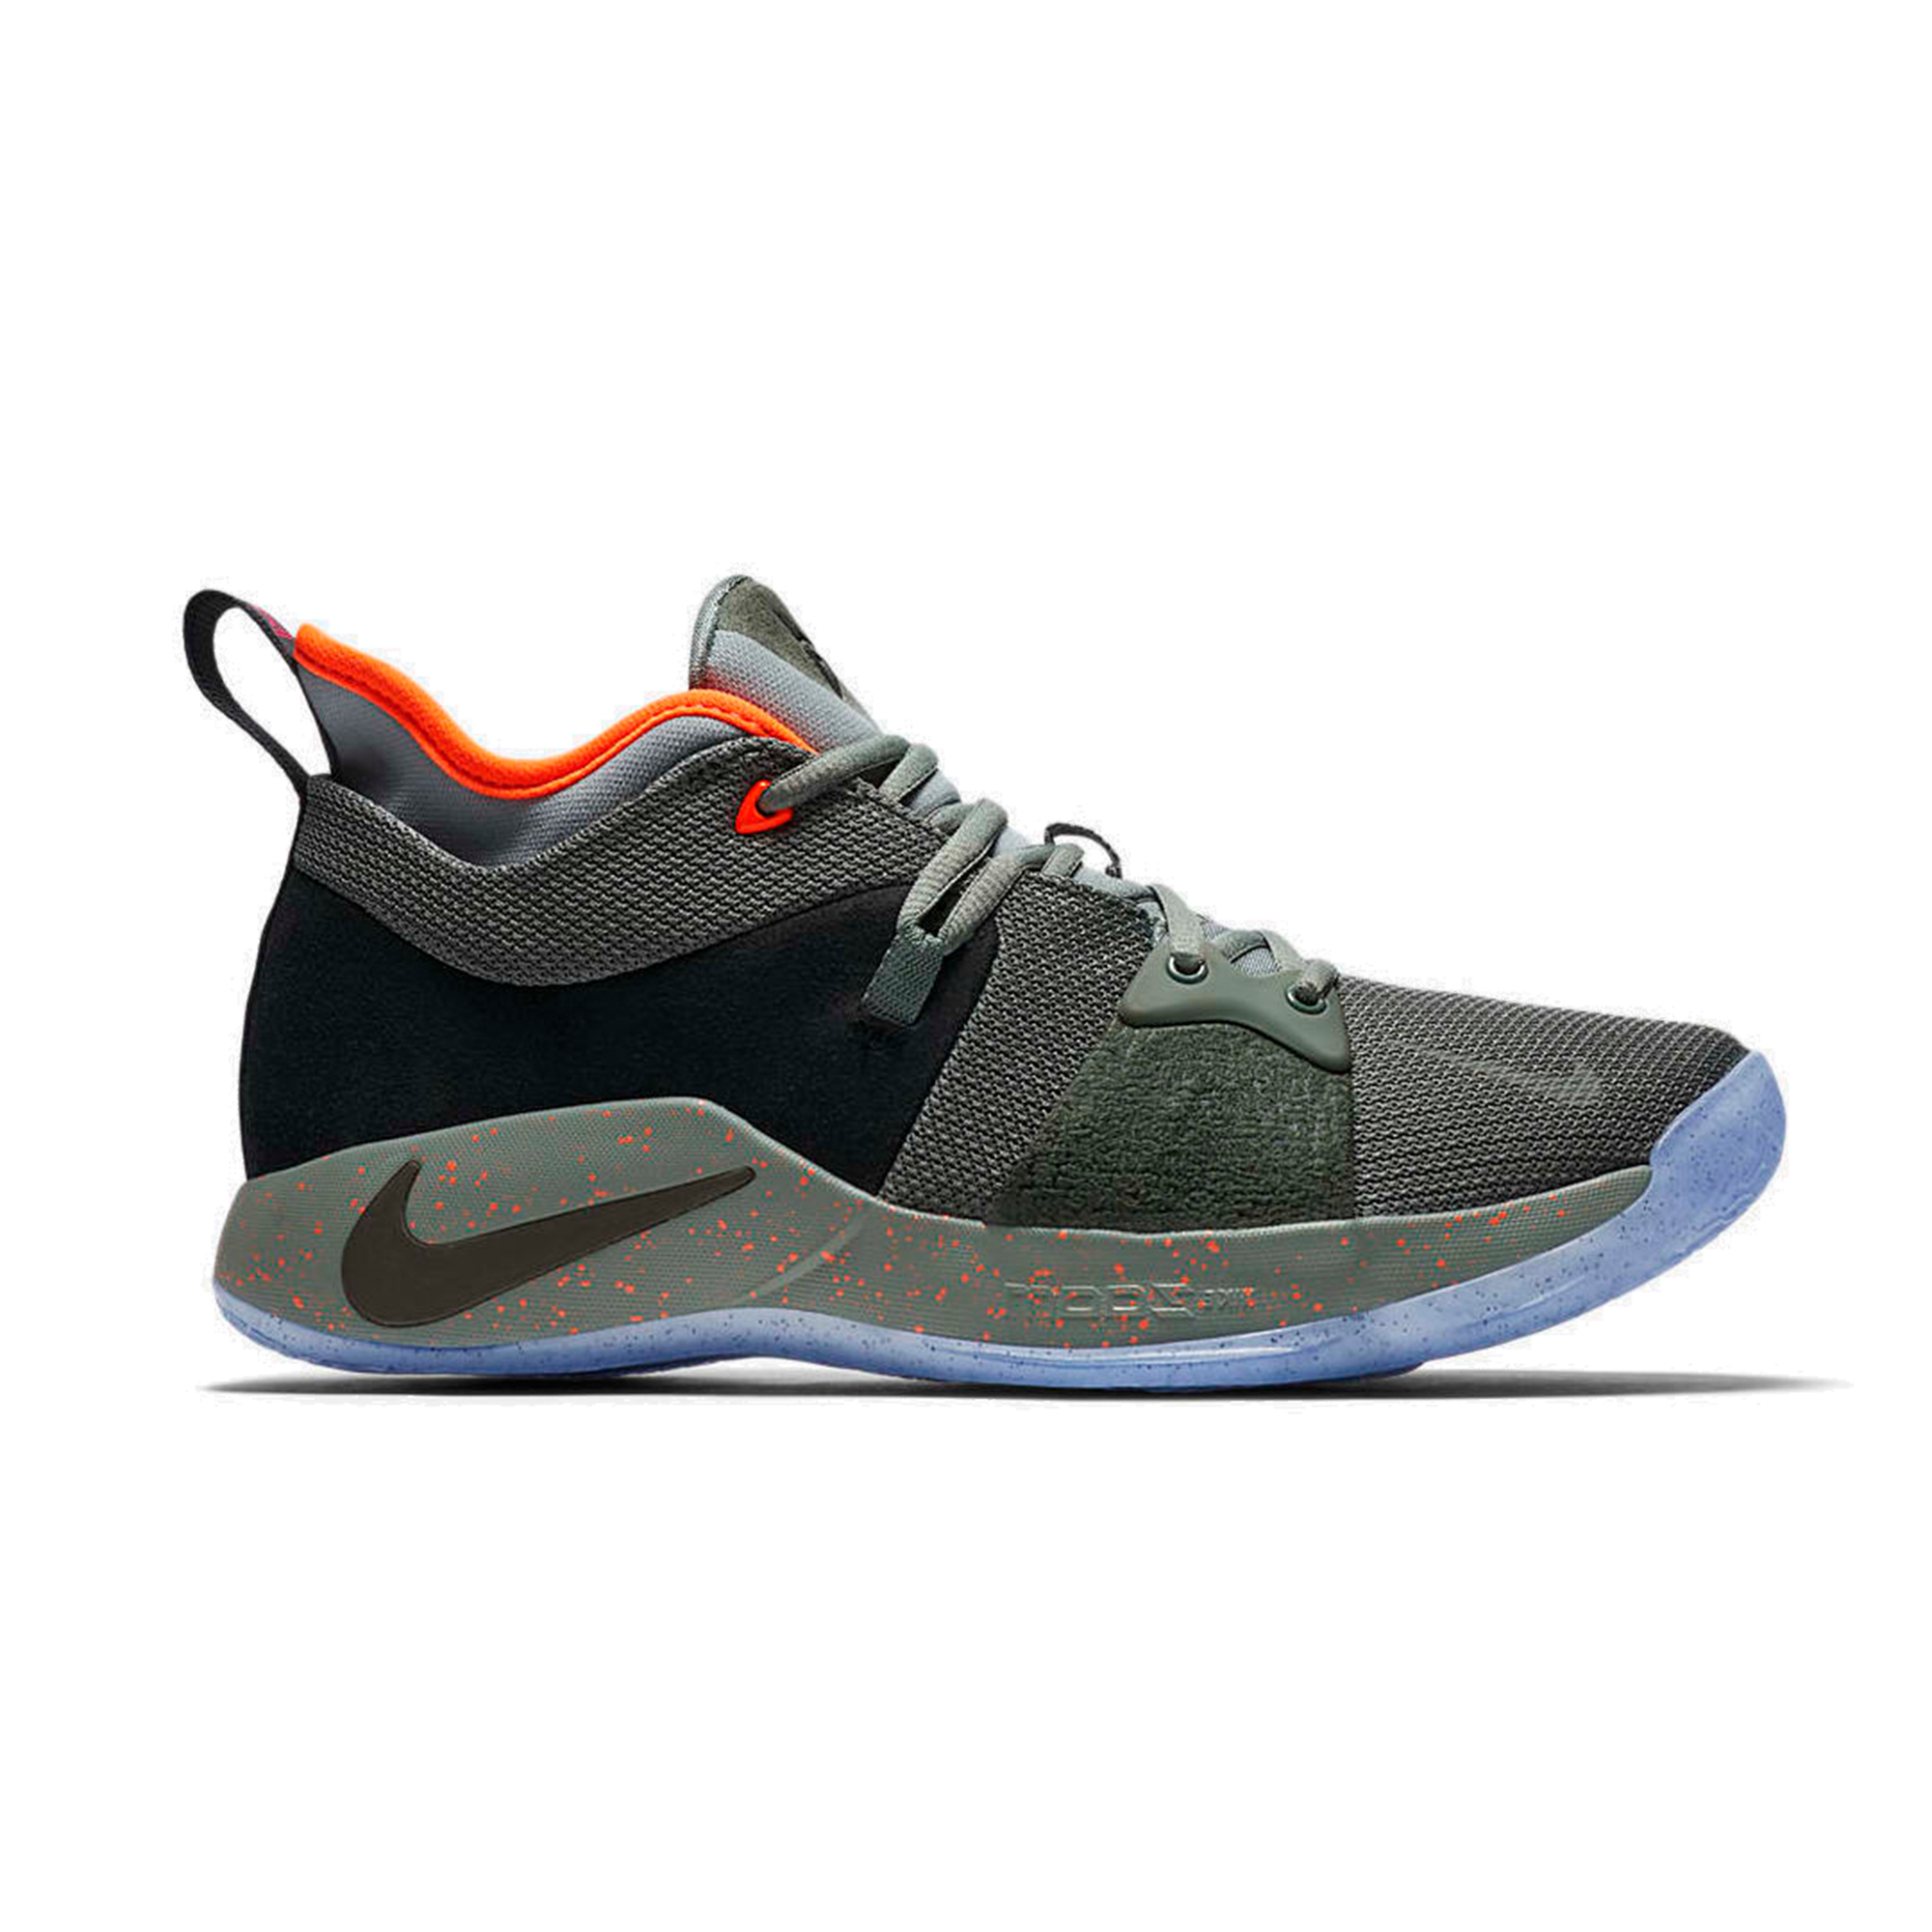 pg 2 size 13